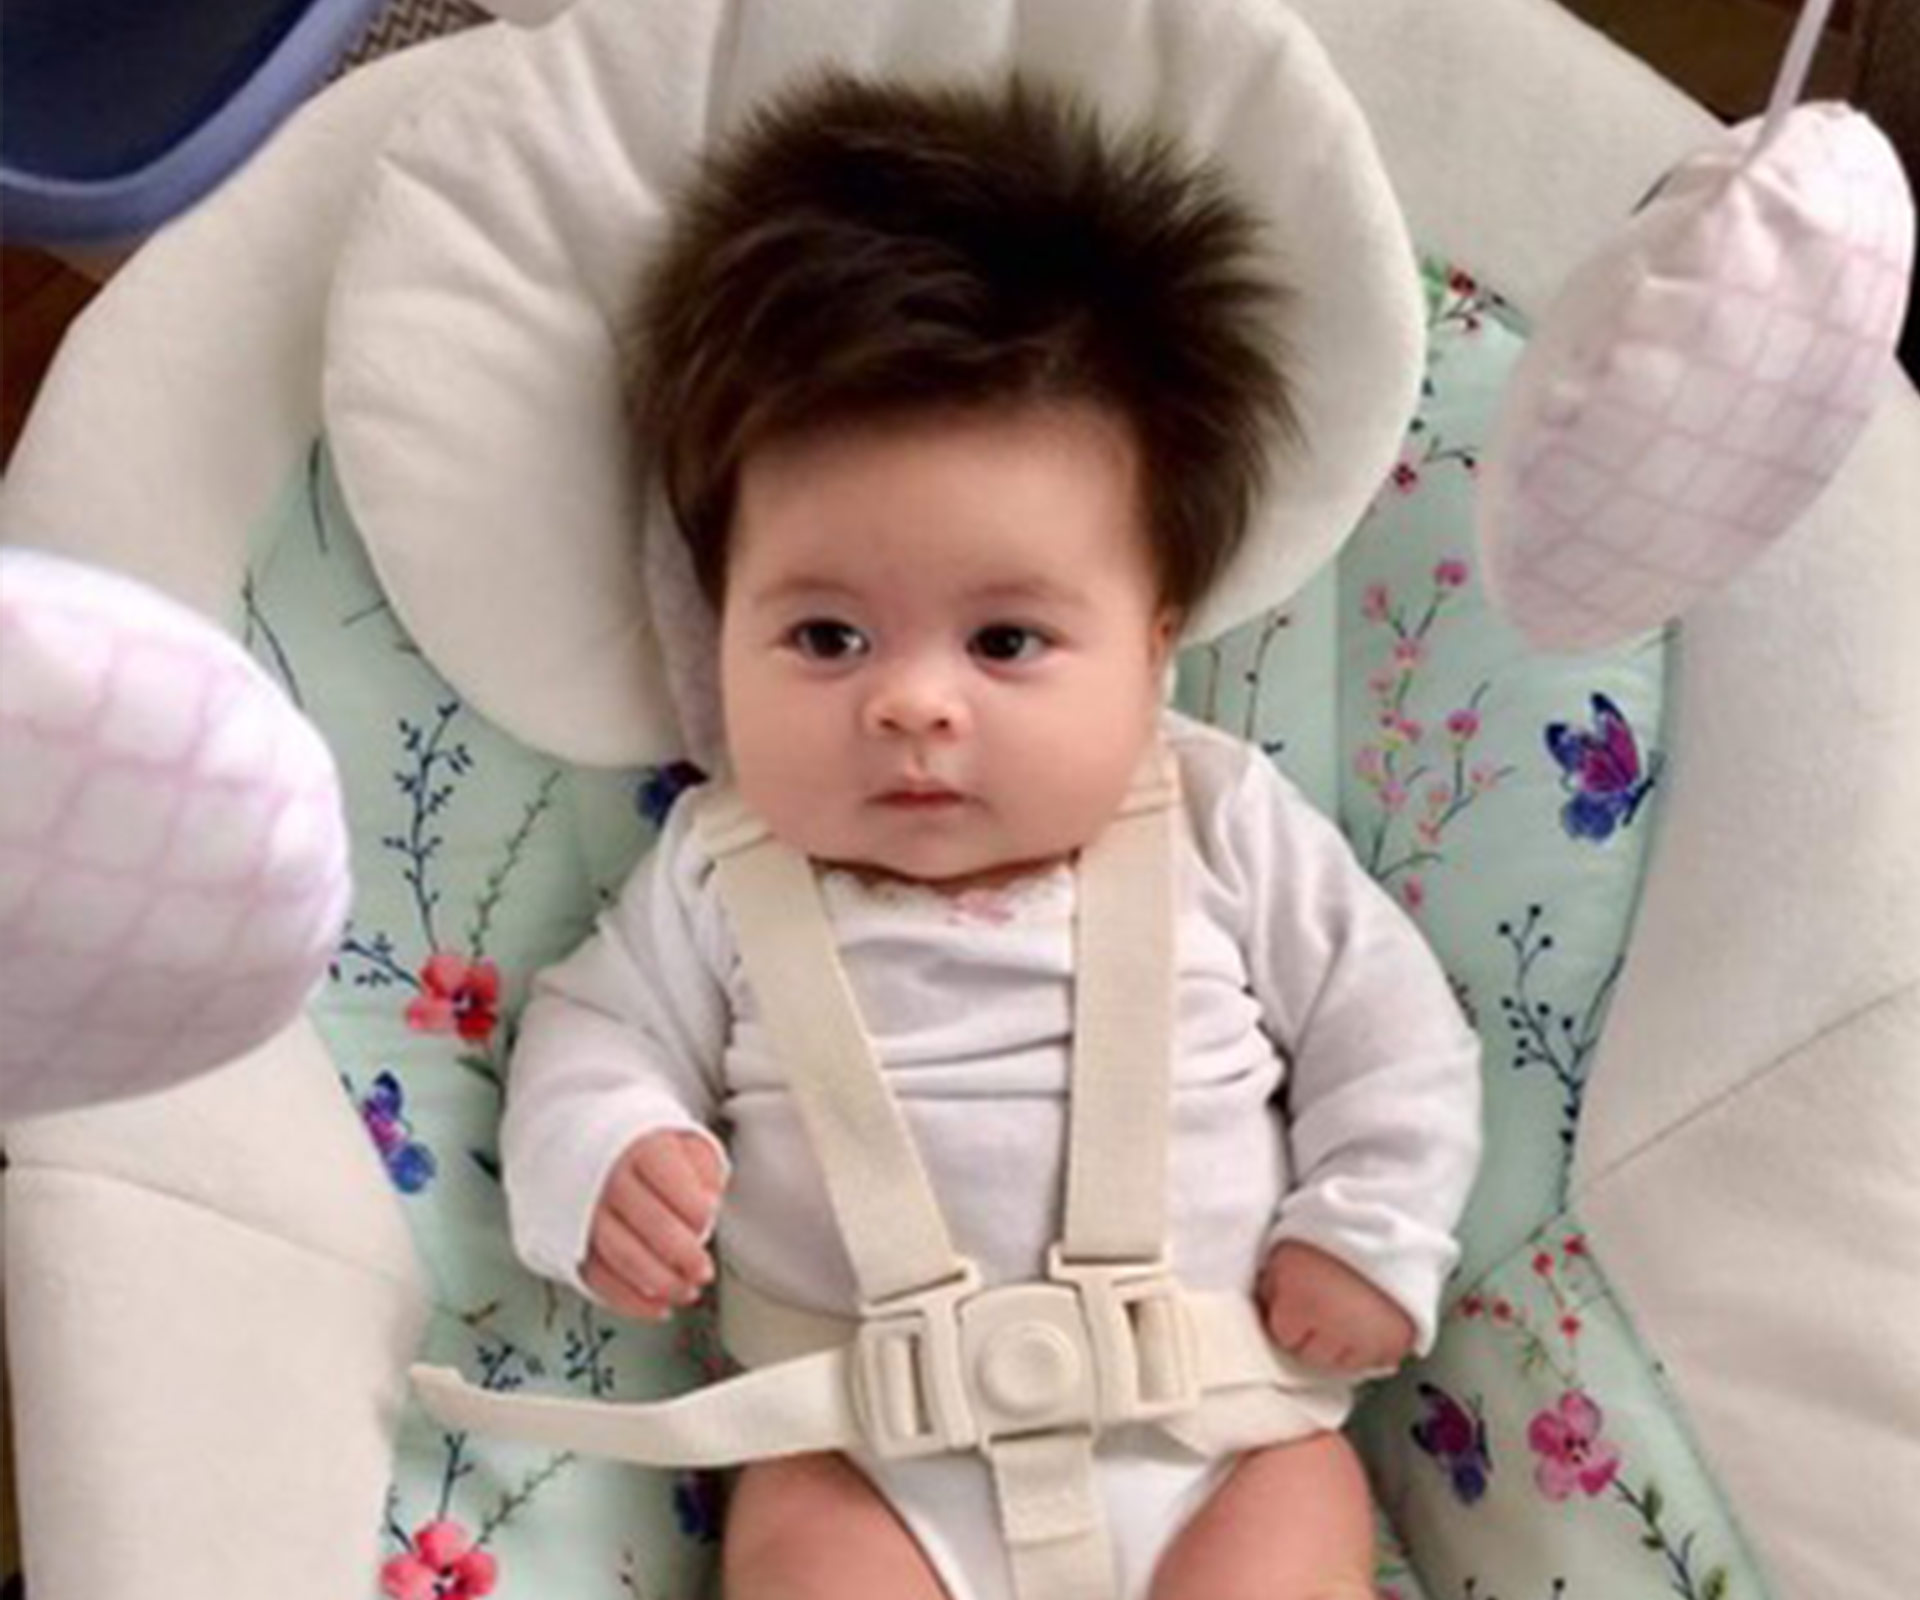 Babies who were born with SO MUCH hair